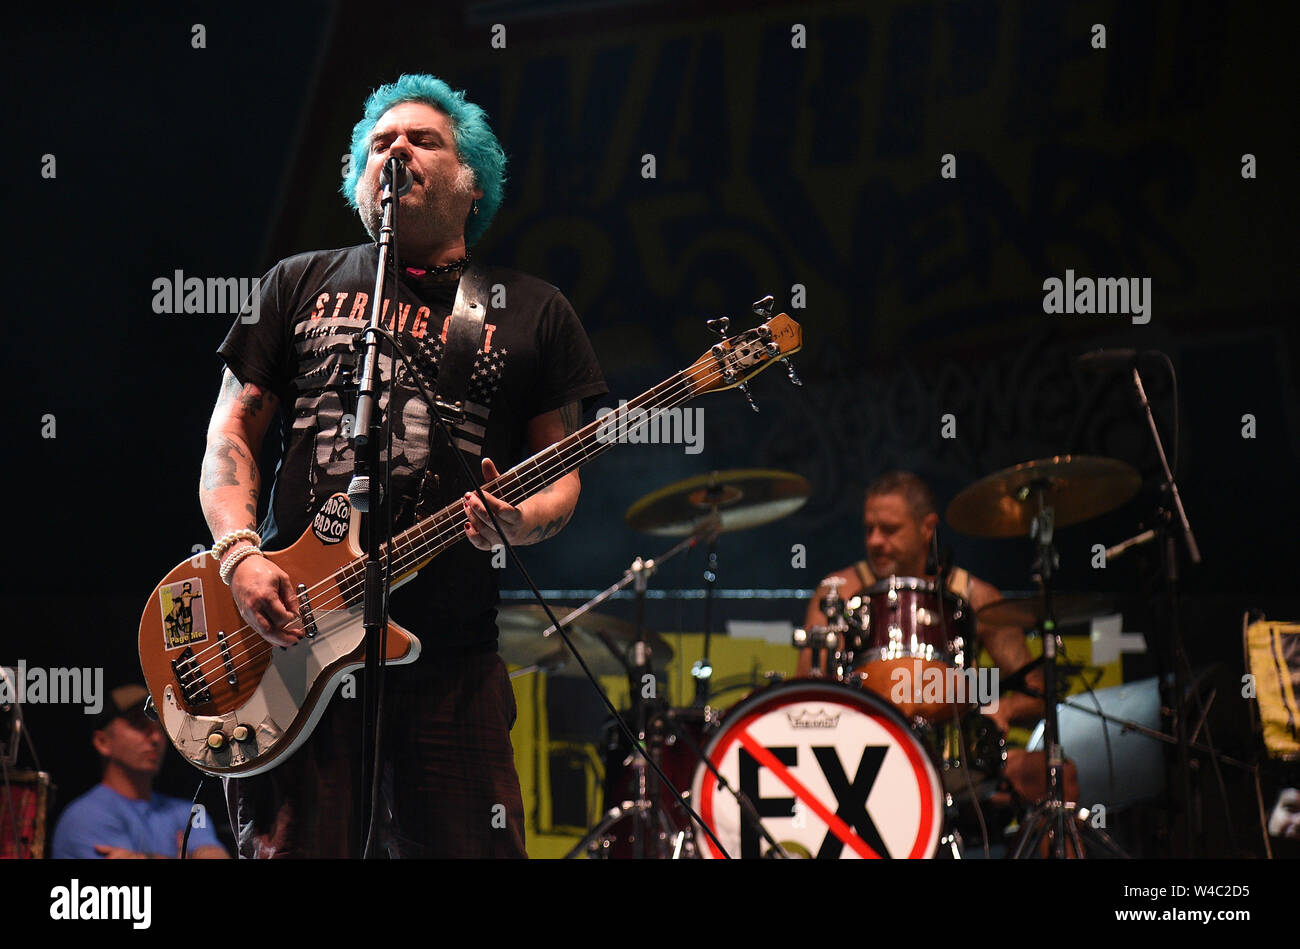 California, USA. 21st July, 2019. NOFX- Fat Mike performs during the Vans Warped Tour 25th Anniversary on July 21, 2019 in Mountain View, California. Credit: MediaPunch Inc/Alamy Live News Stock Photo